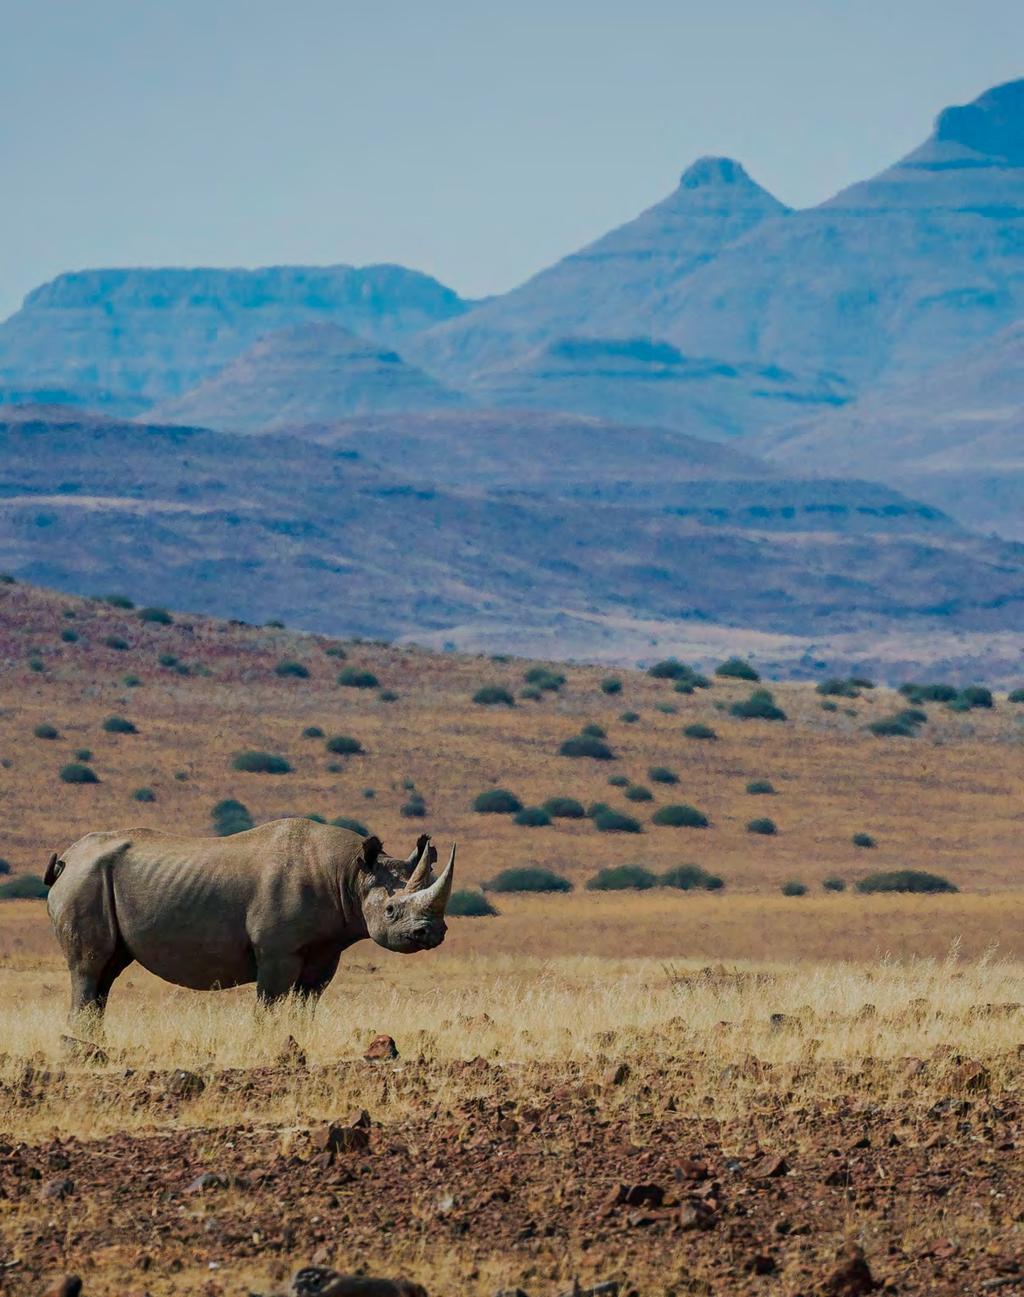 COMMUNITY AND CONSERVATION INITIATIVES SAVE THE RHINO TRUST Focused on monitoring, understanding and protecting the area s black rhino populations for 25 years, Save the Rhino Trust Dana Allen/Desert